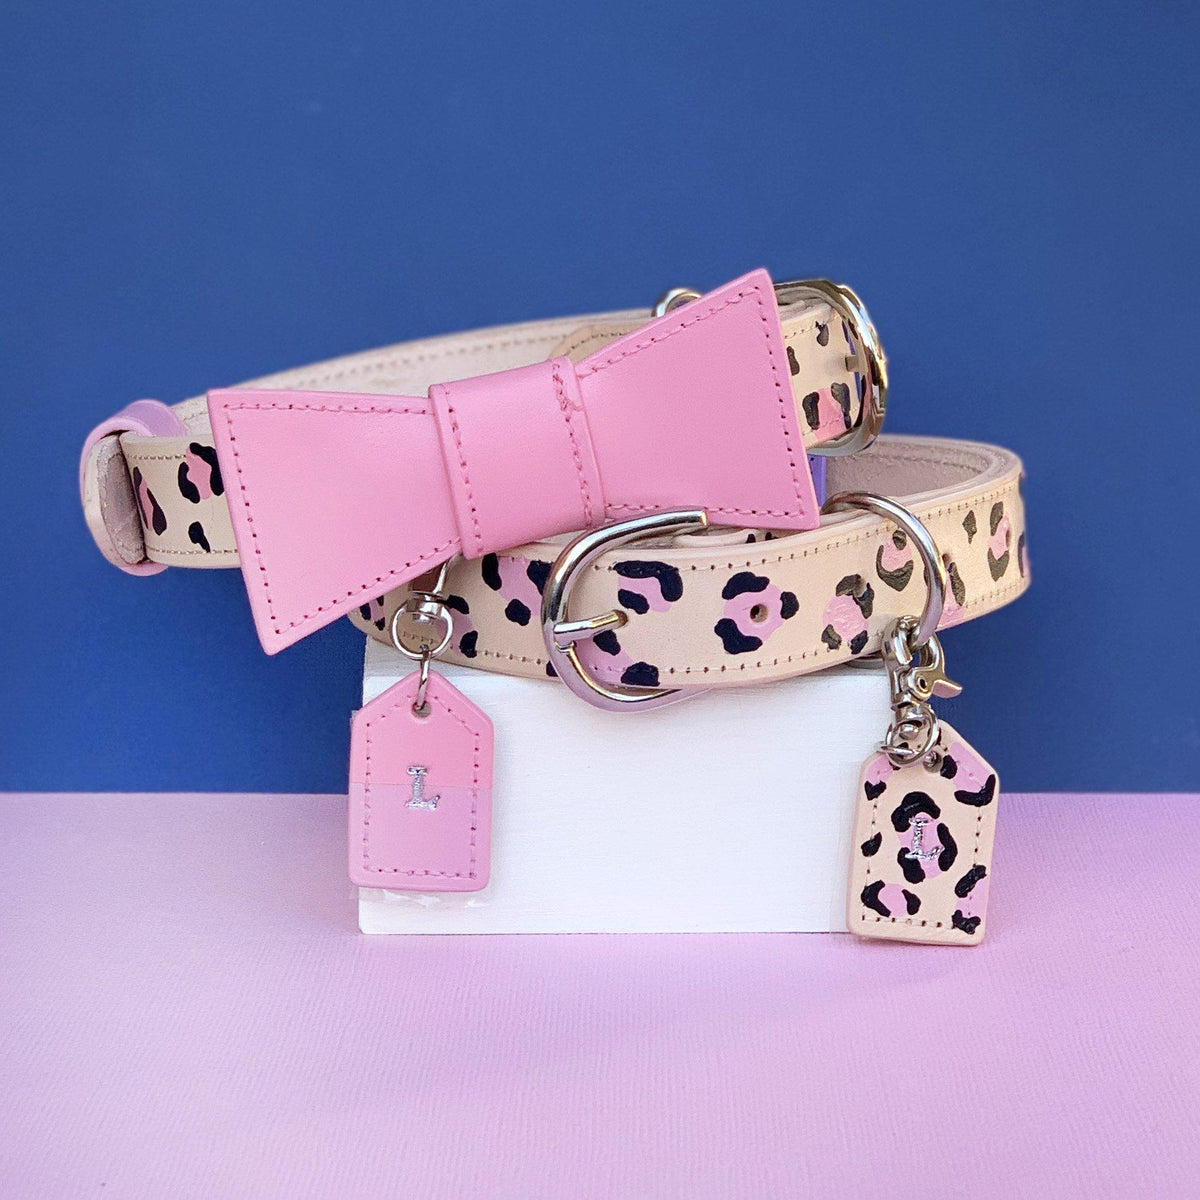 Pink Leopard Print Dog Collar hand painted in Australia with bow tie and monogram dog tag